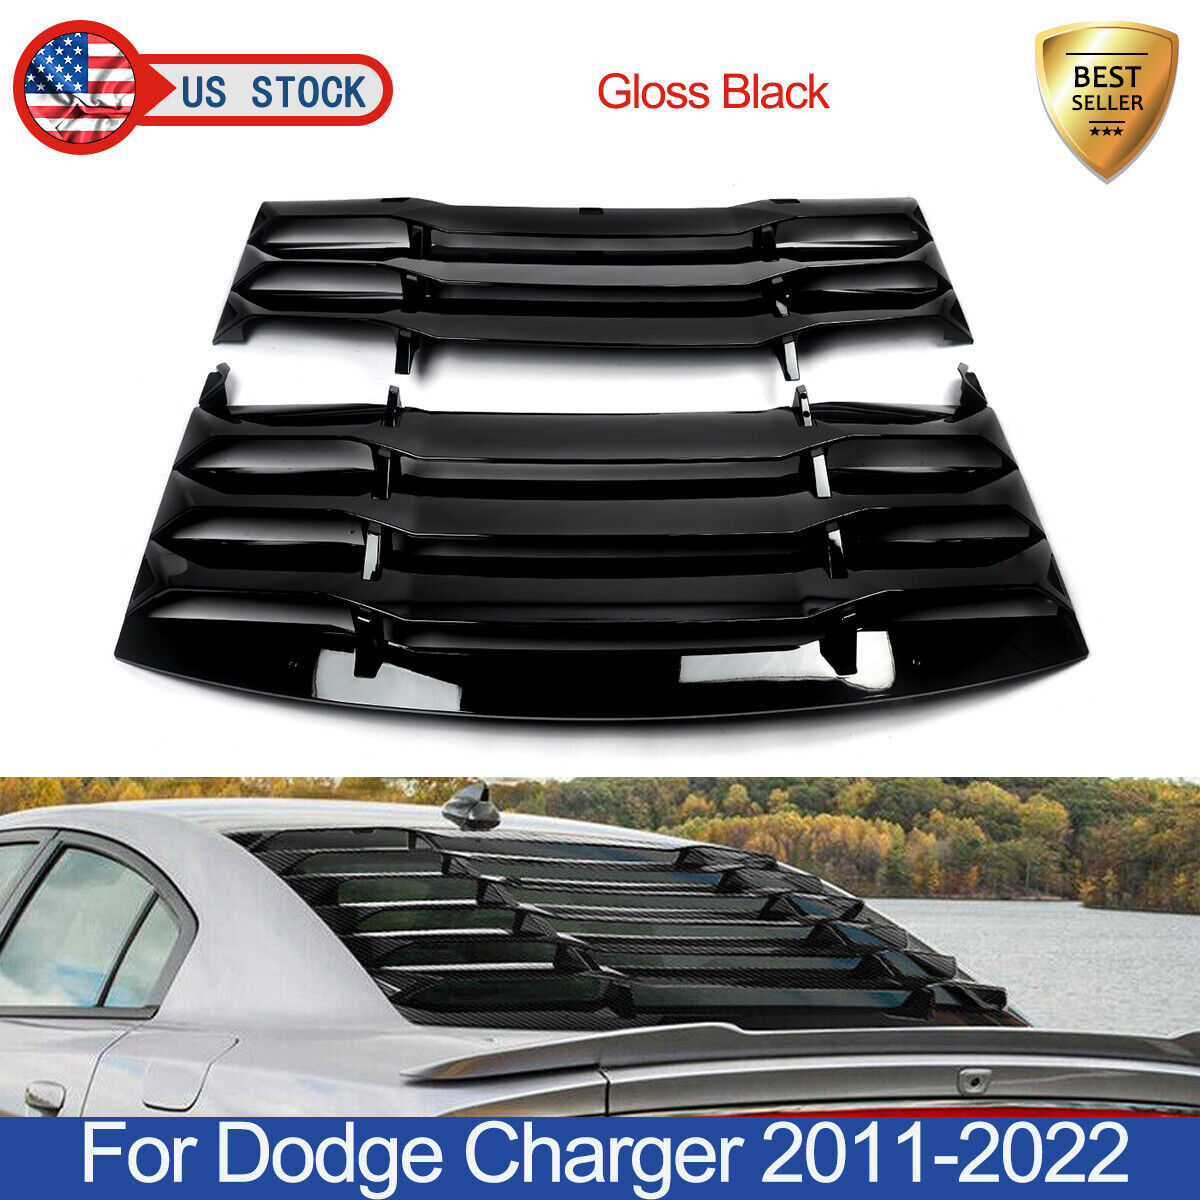 Fits 2011-23 Dodge Charger Gloss Black Rear Window Louver Cover Sun Guard ABS